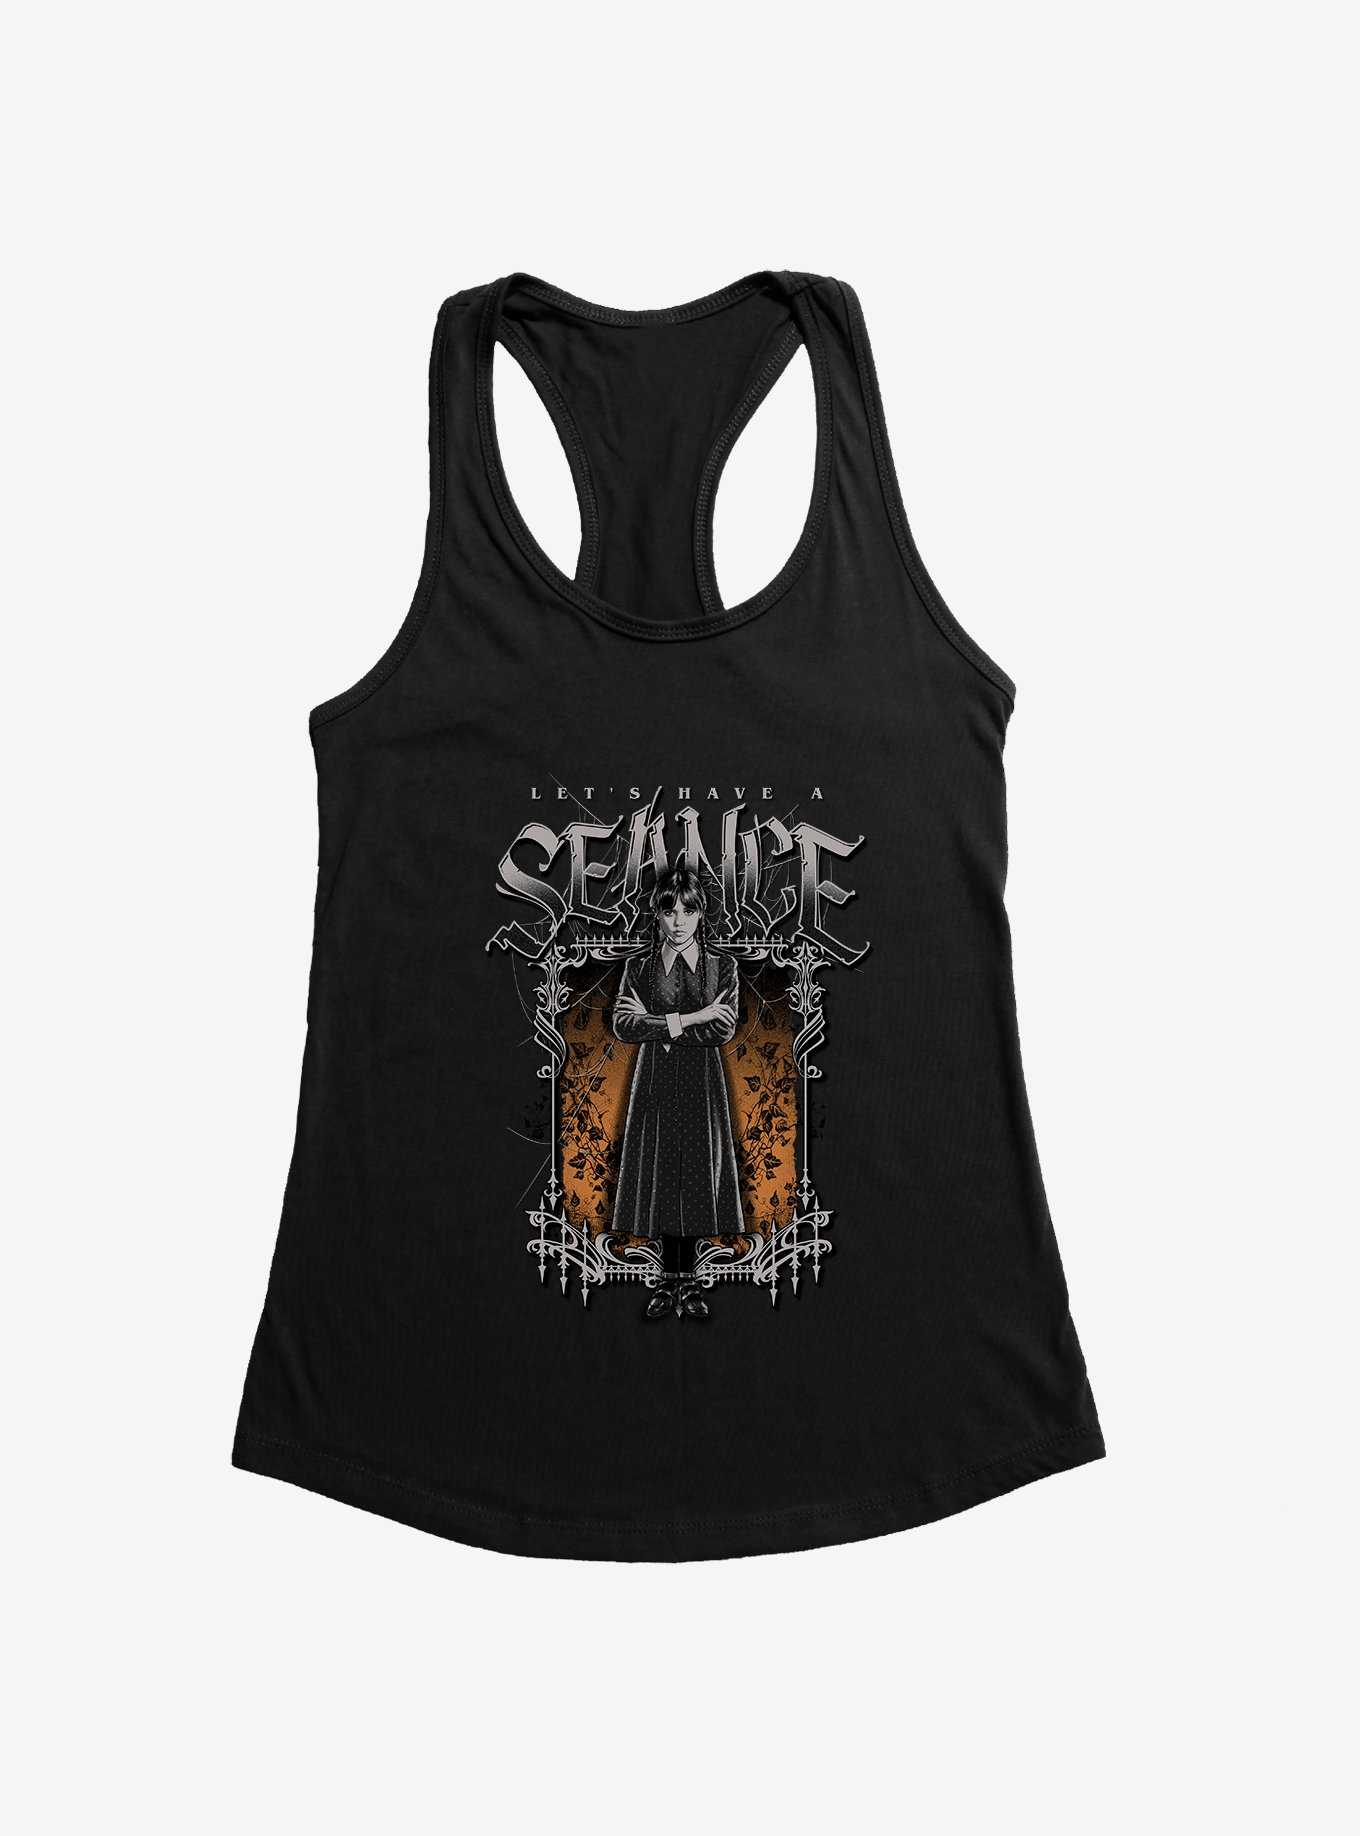 Wednesday Let's Have A Seance Girls Tank, , hi-res